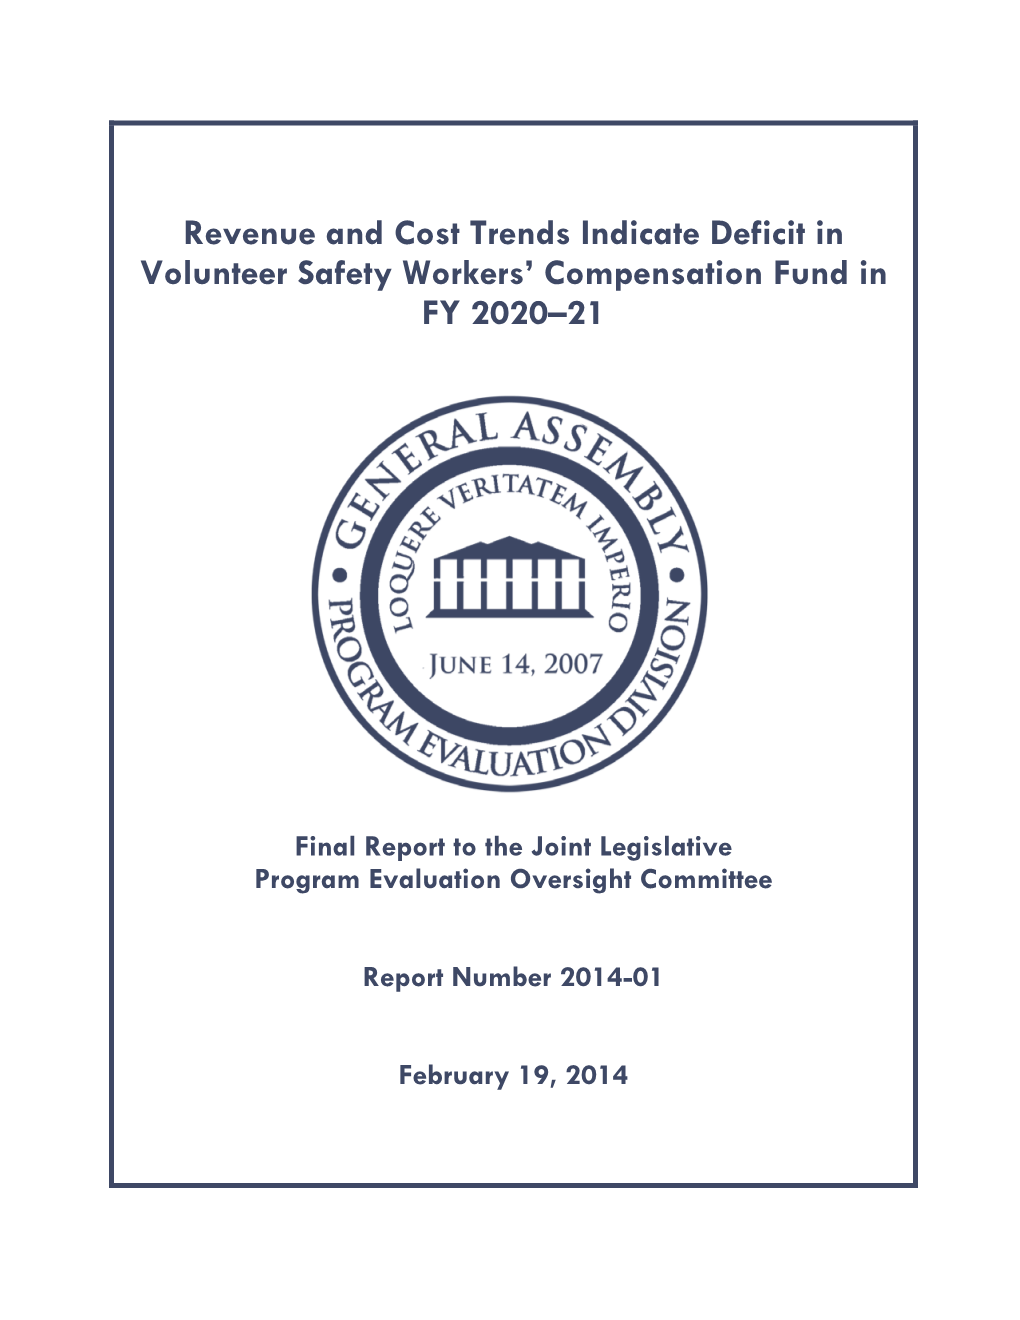 Revenue and Cost Trends Indicate Deficit in Volunteer Safety Workers’ Compensation Fund in FY 2020–21